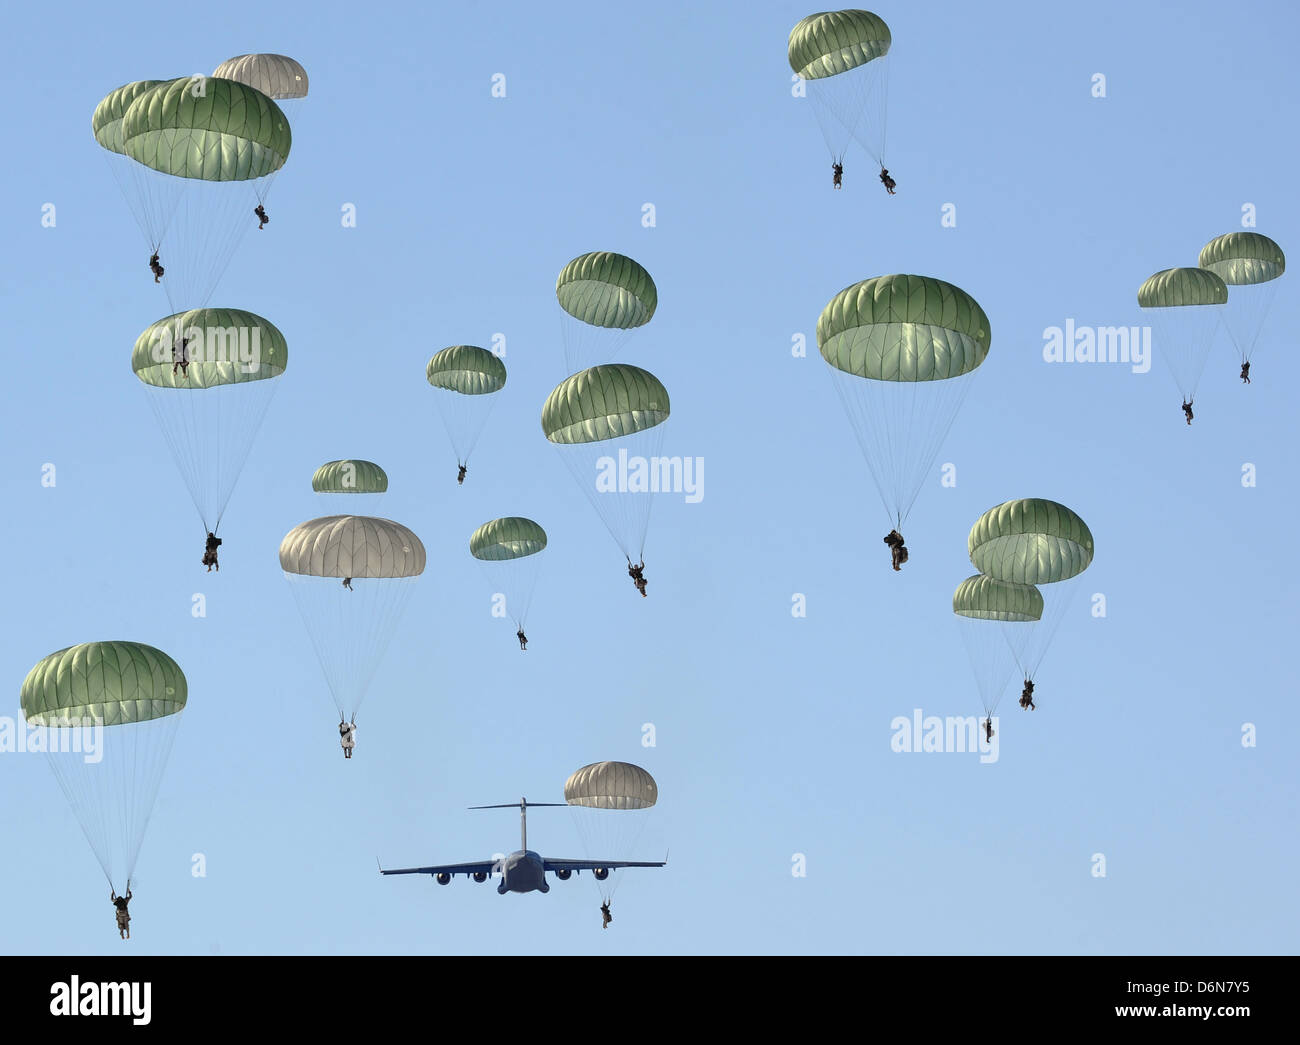 US Army paratrooper soldiers parachute during an airdrop exercise April